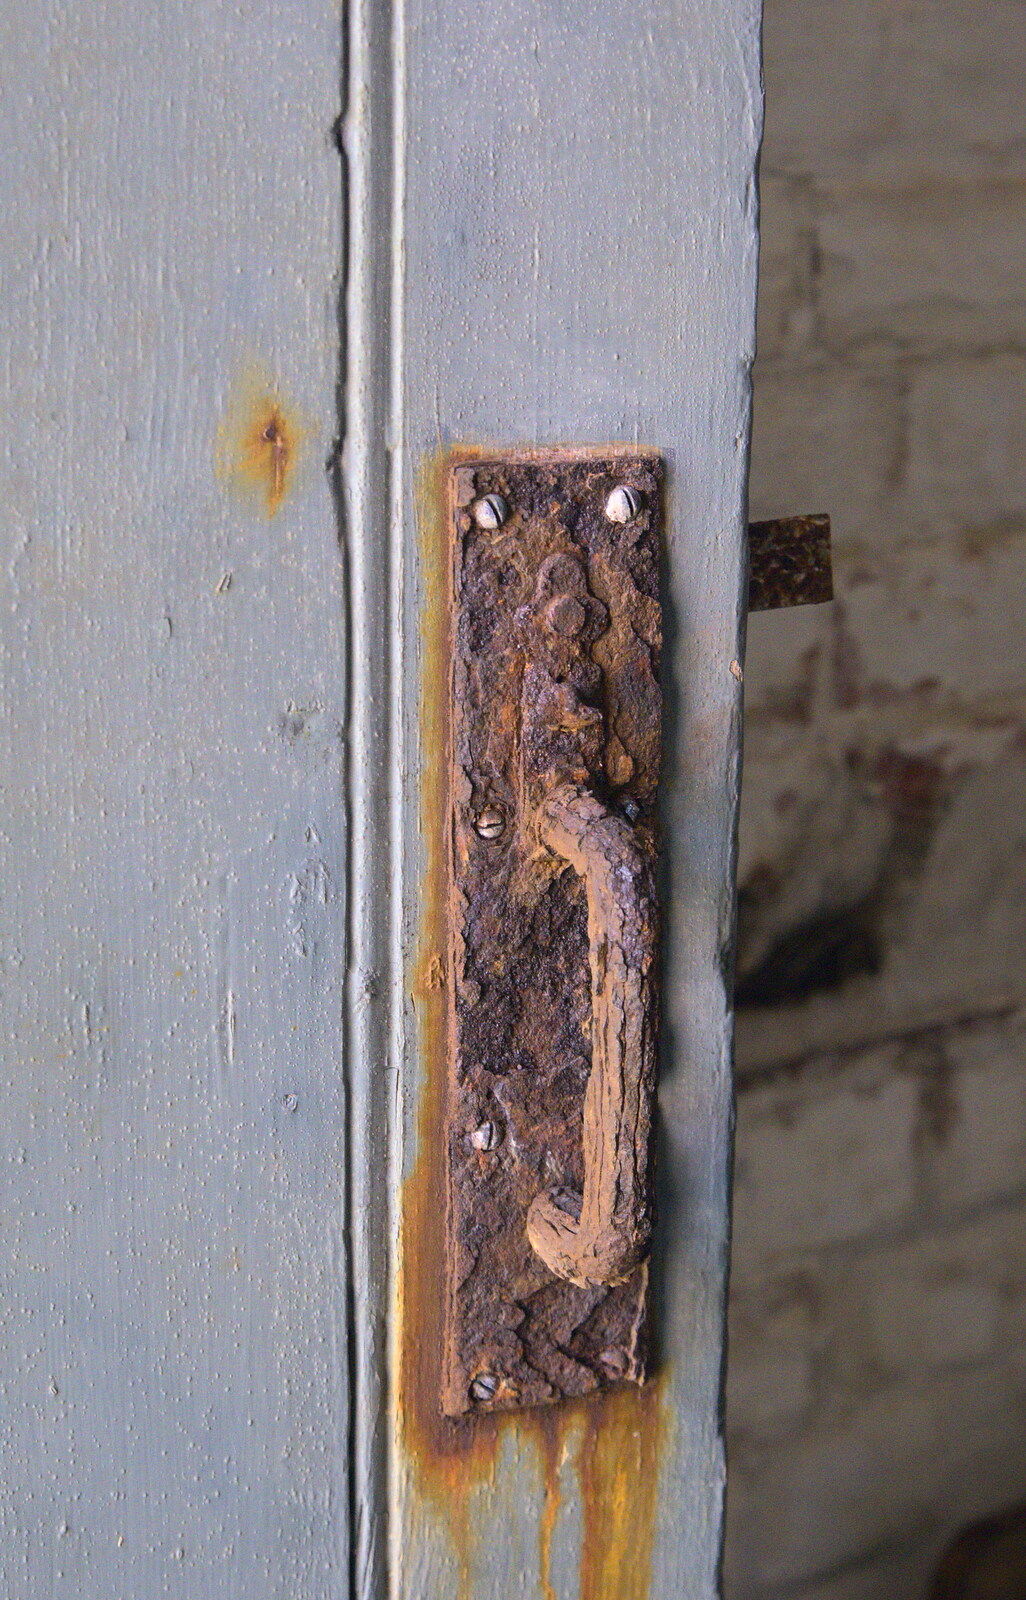 A very rusted door handle from A Trip to Hurst Castle, Keyhaven, Hampshire - 28th August 2015